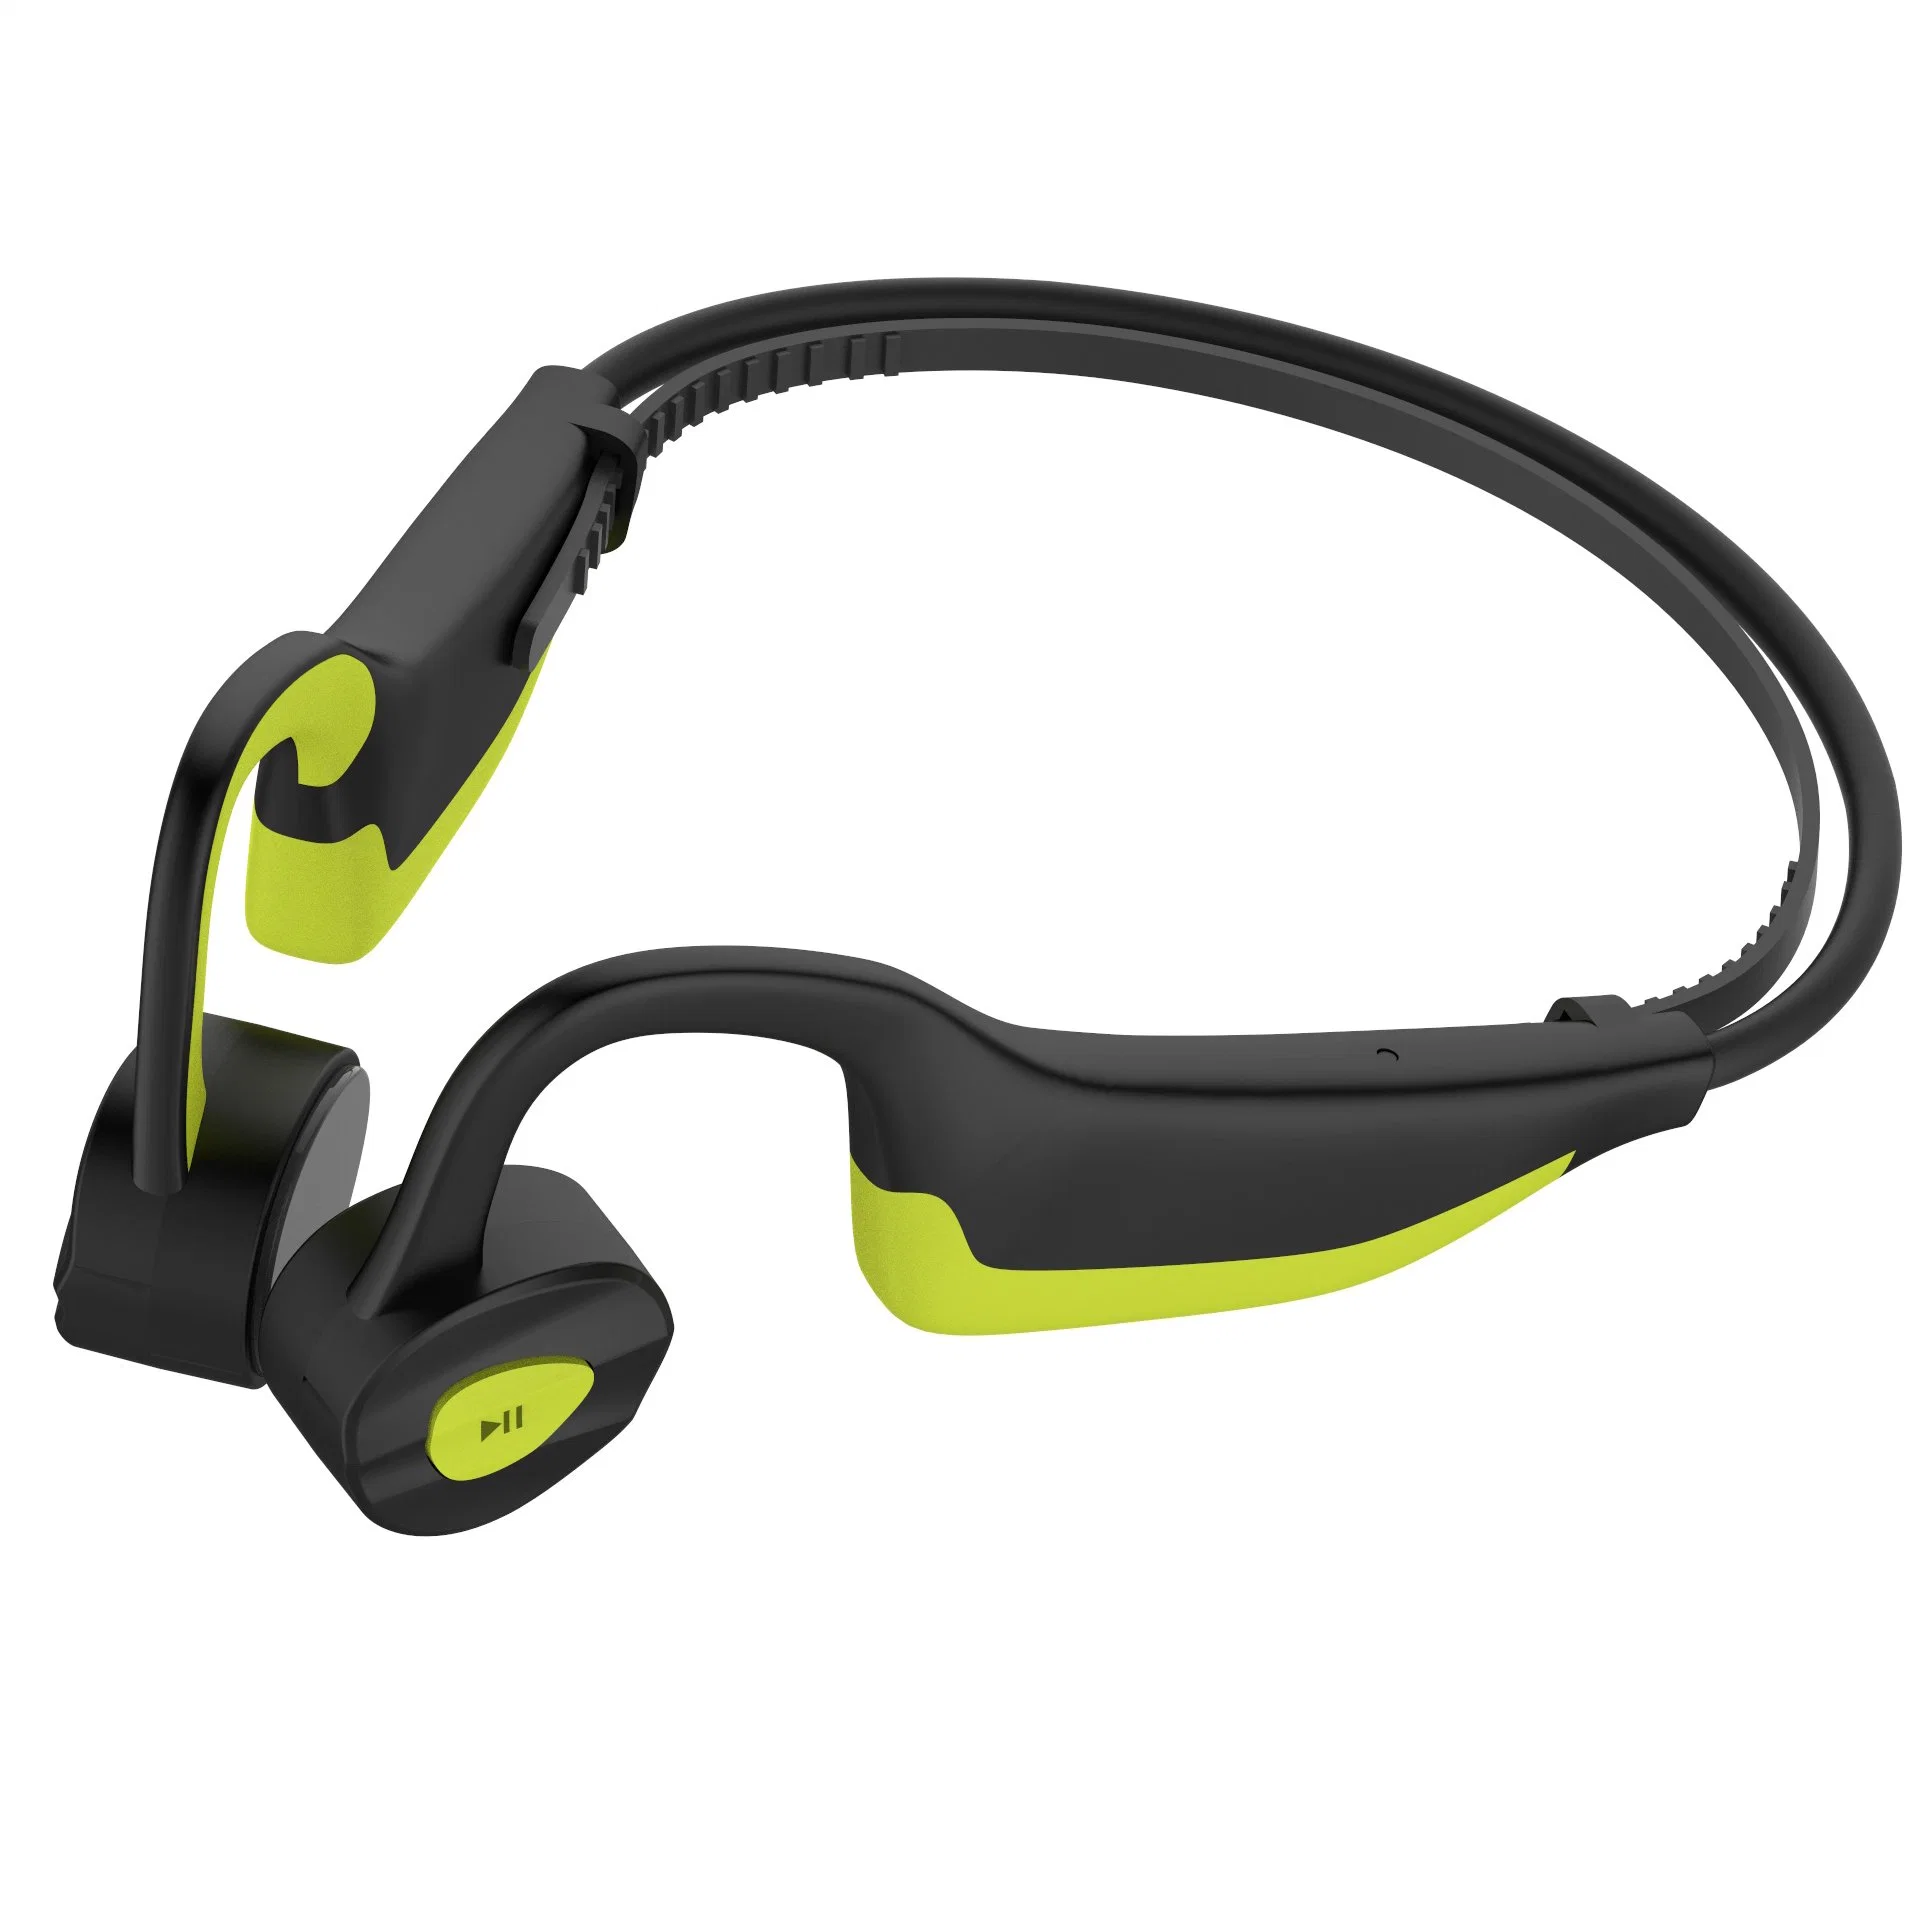 Hot Selling Style Sport Headphone Bone Conduction Headphone Waterproof MP3 for Swimming Diving